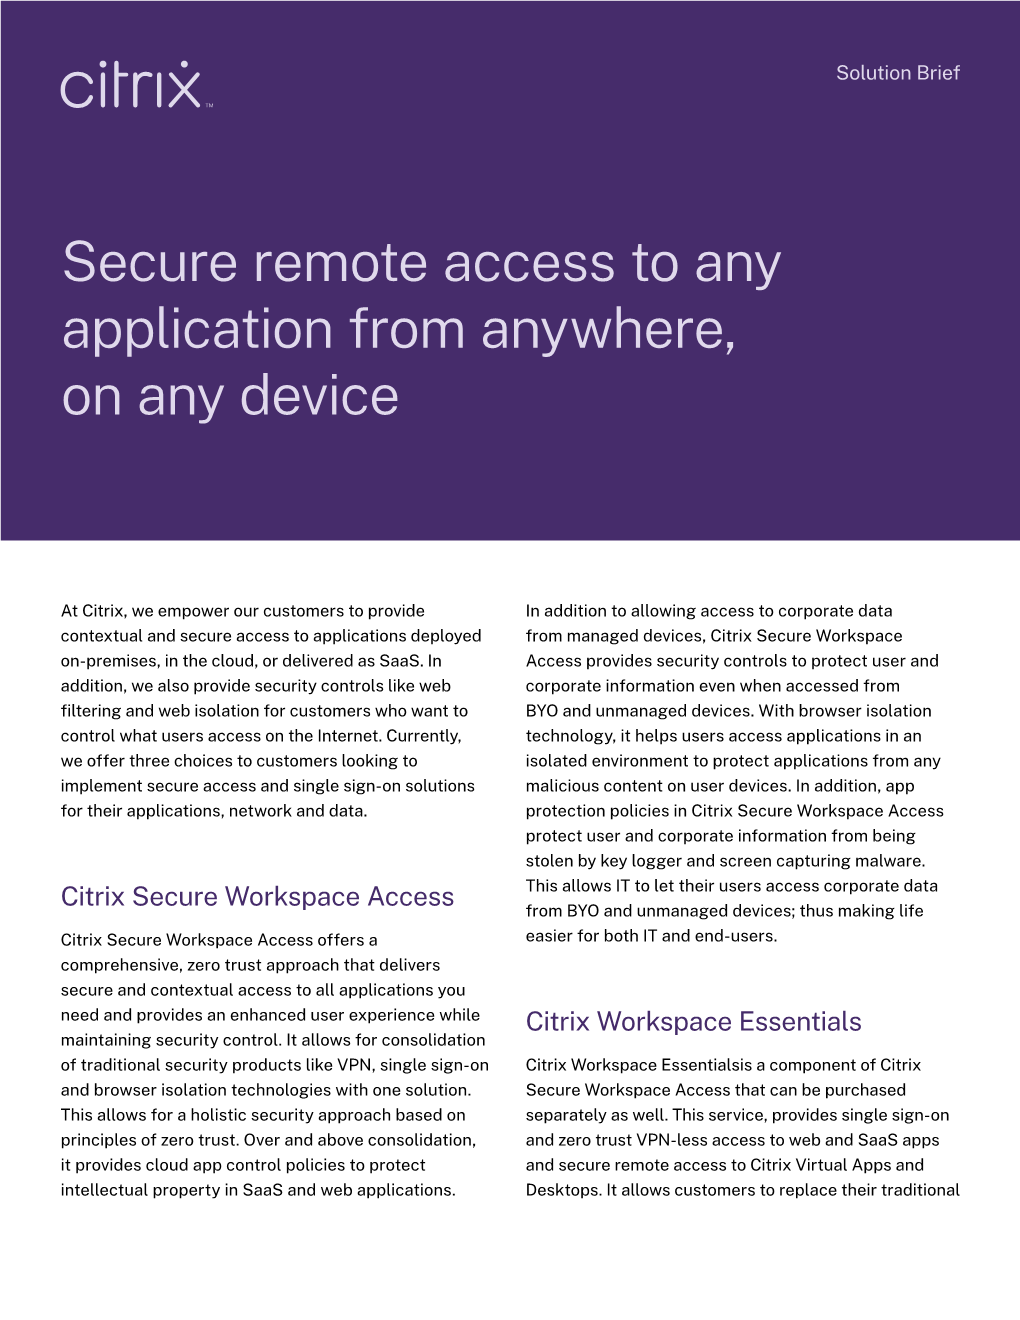 Secure Remote Access to Any Application from Anywhere, on Any Device